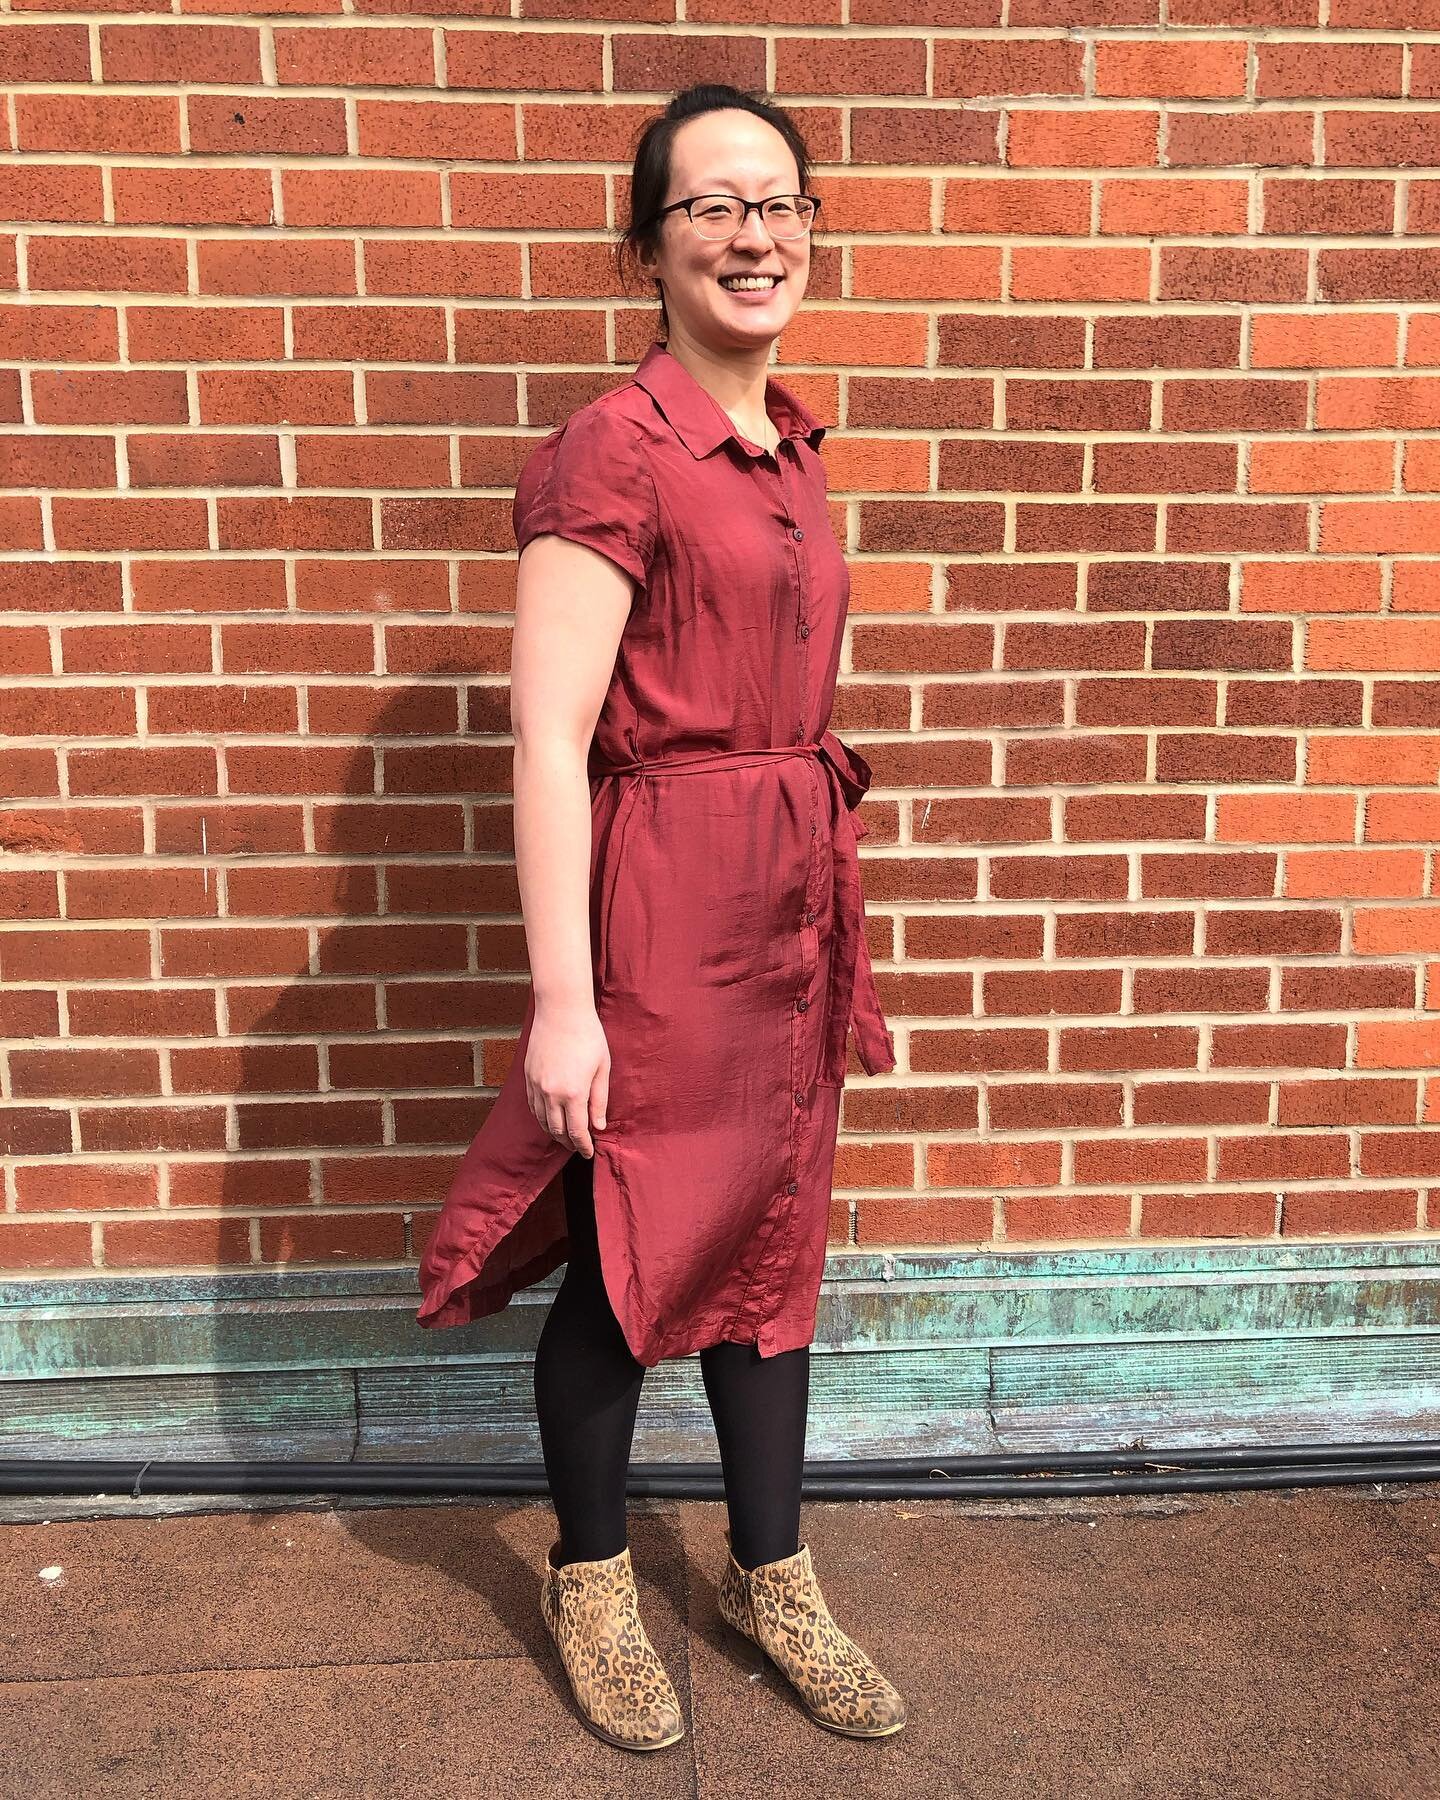 I made this dress in January for my Lunar New Year party. I asked everyone to wear red, and then I realized that I didn&rsquo;t have any festive red garments to wear! Luckily, I had some red silk/rayon fabric in my stash and made this dress in a week